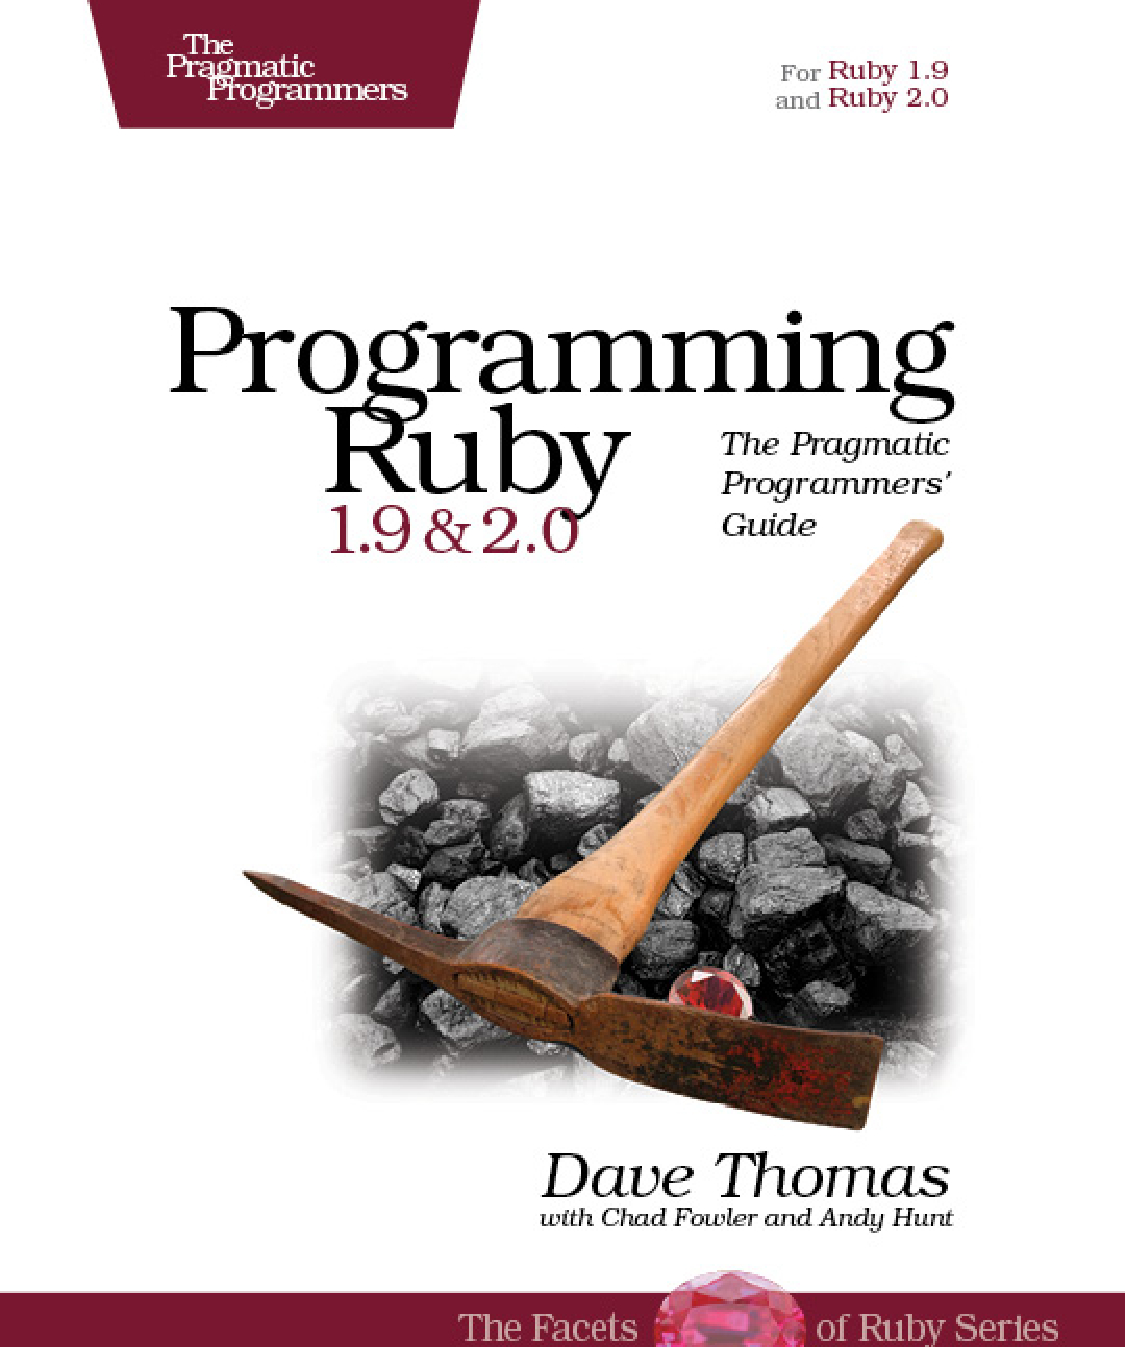 Programming Ruby 1.9 &amp; 2.0 The Pragmatic Programmers&#039; Guide Fourth Edition with regard to Posh Area Meaning In Gujarati